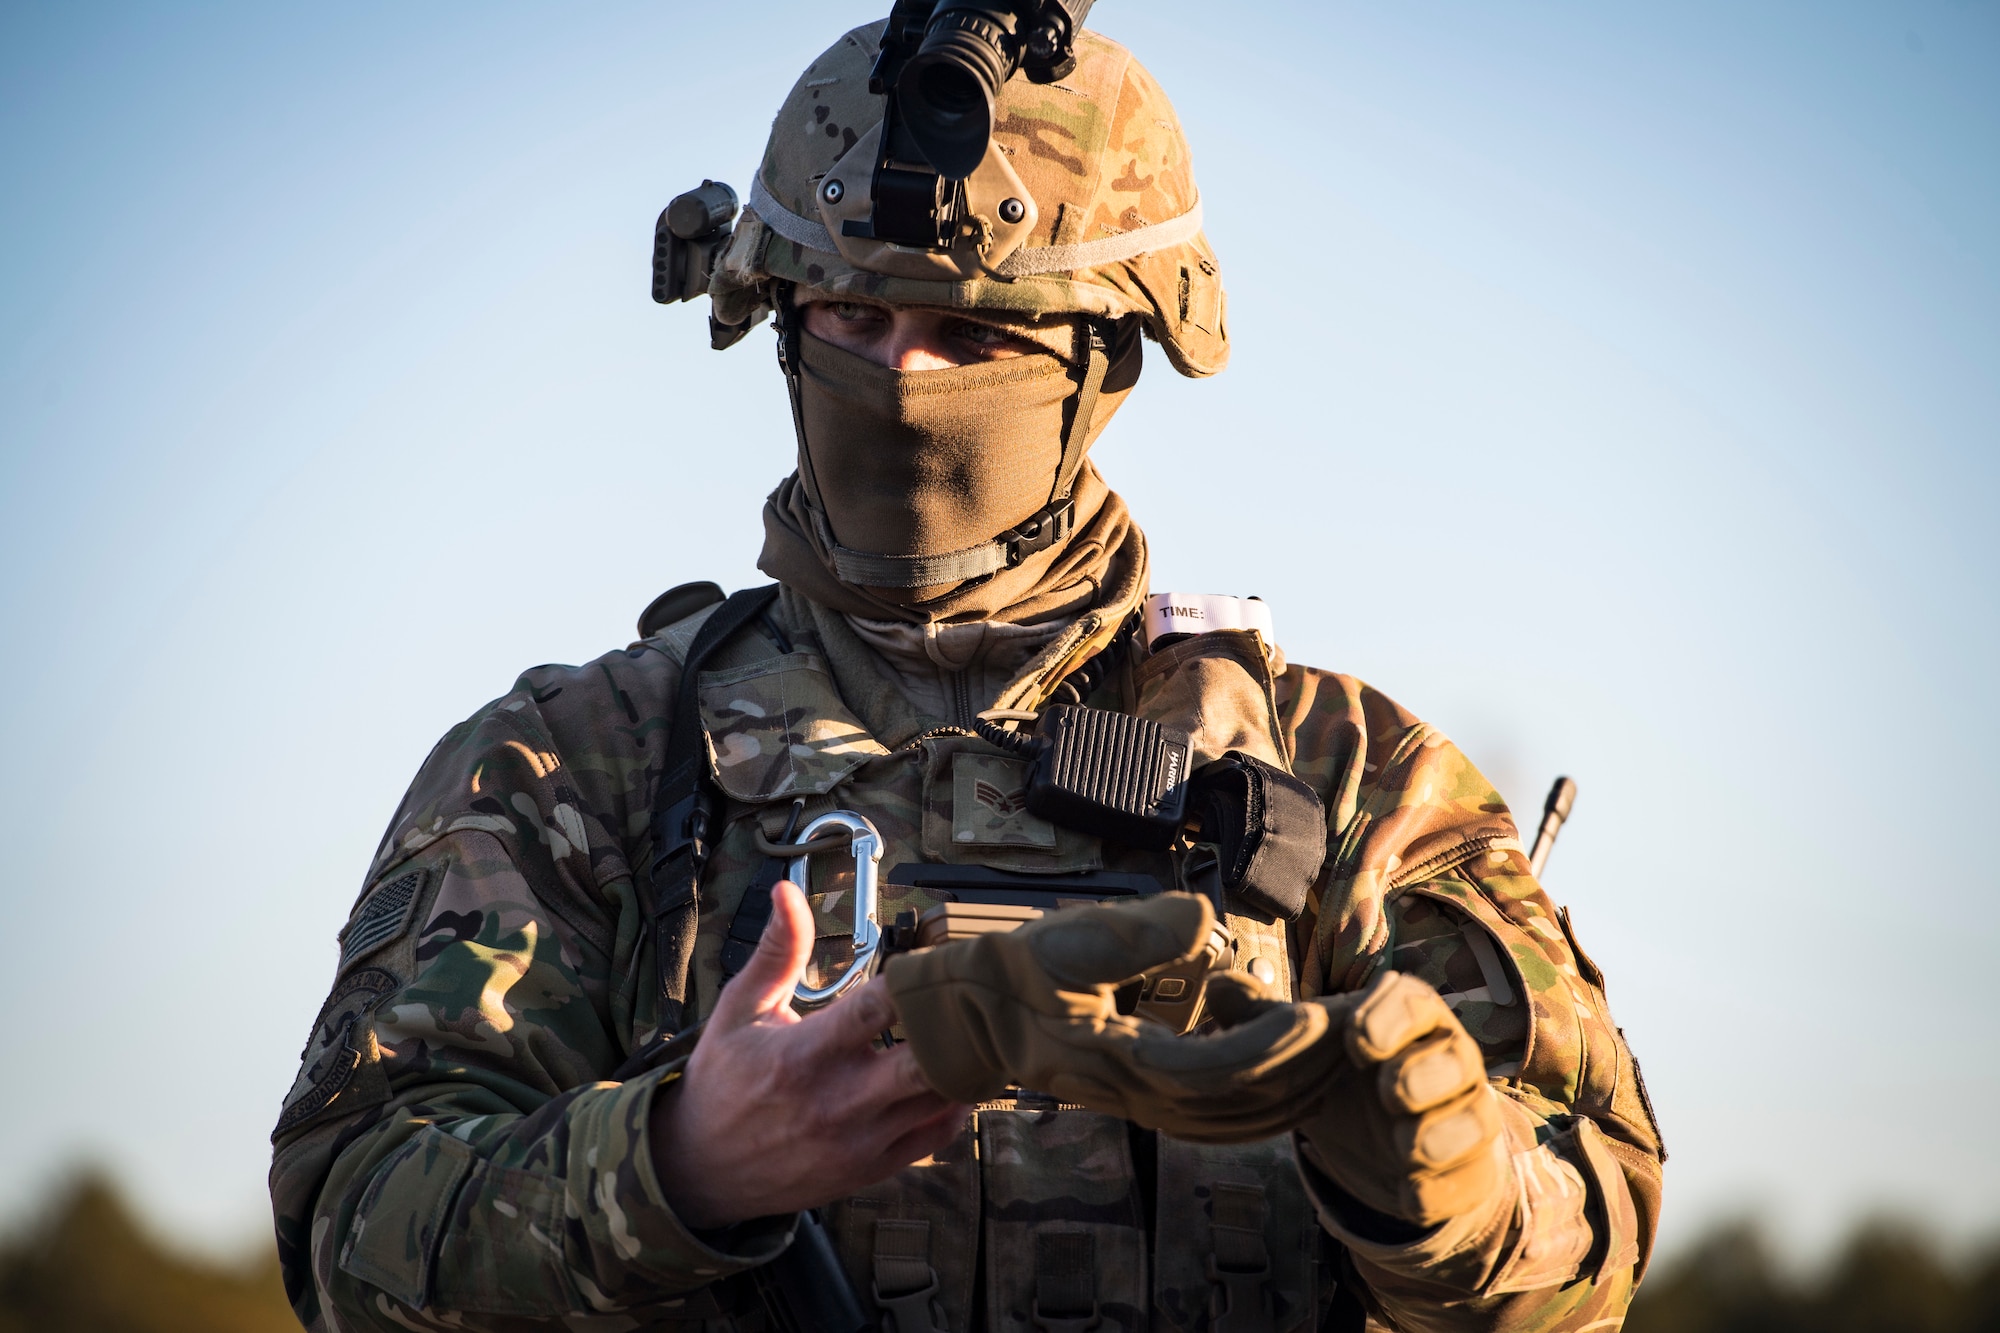 Senior Airman Bryan Bordelon, 824th Base Defense Squadron fireteam member, removes a glove during a Mission Readiness Exercise, March 13, 2018, at Joint Base McGuire-Dix Lakehurst, N.J. Evaluators tested the 824th BDS from Moody Air Force Base, Ga., and the 105th Security Forces Squadron from Stewart Air National Guard Base, N.Y., to ensure their combat readiness. (U.S. Air Force photo by Senior Airman Janiqua P. Robinson)